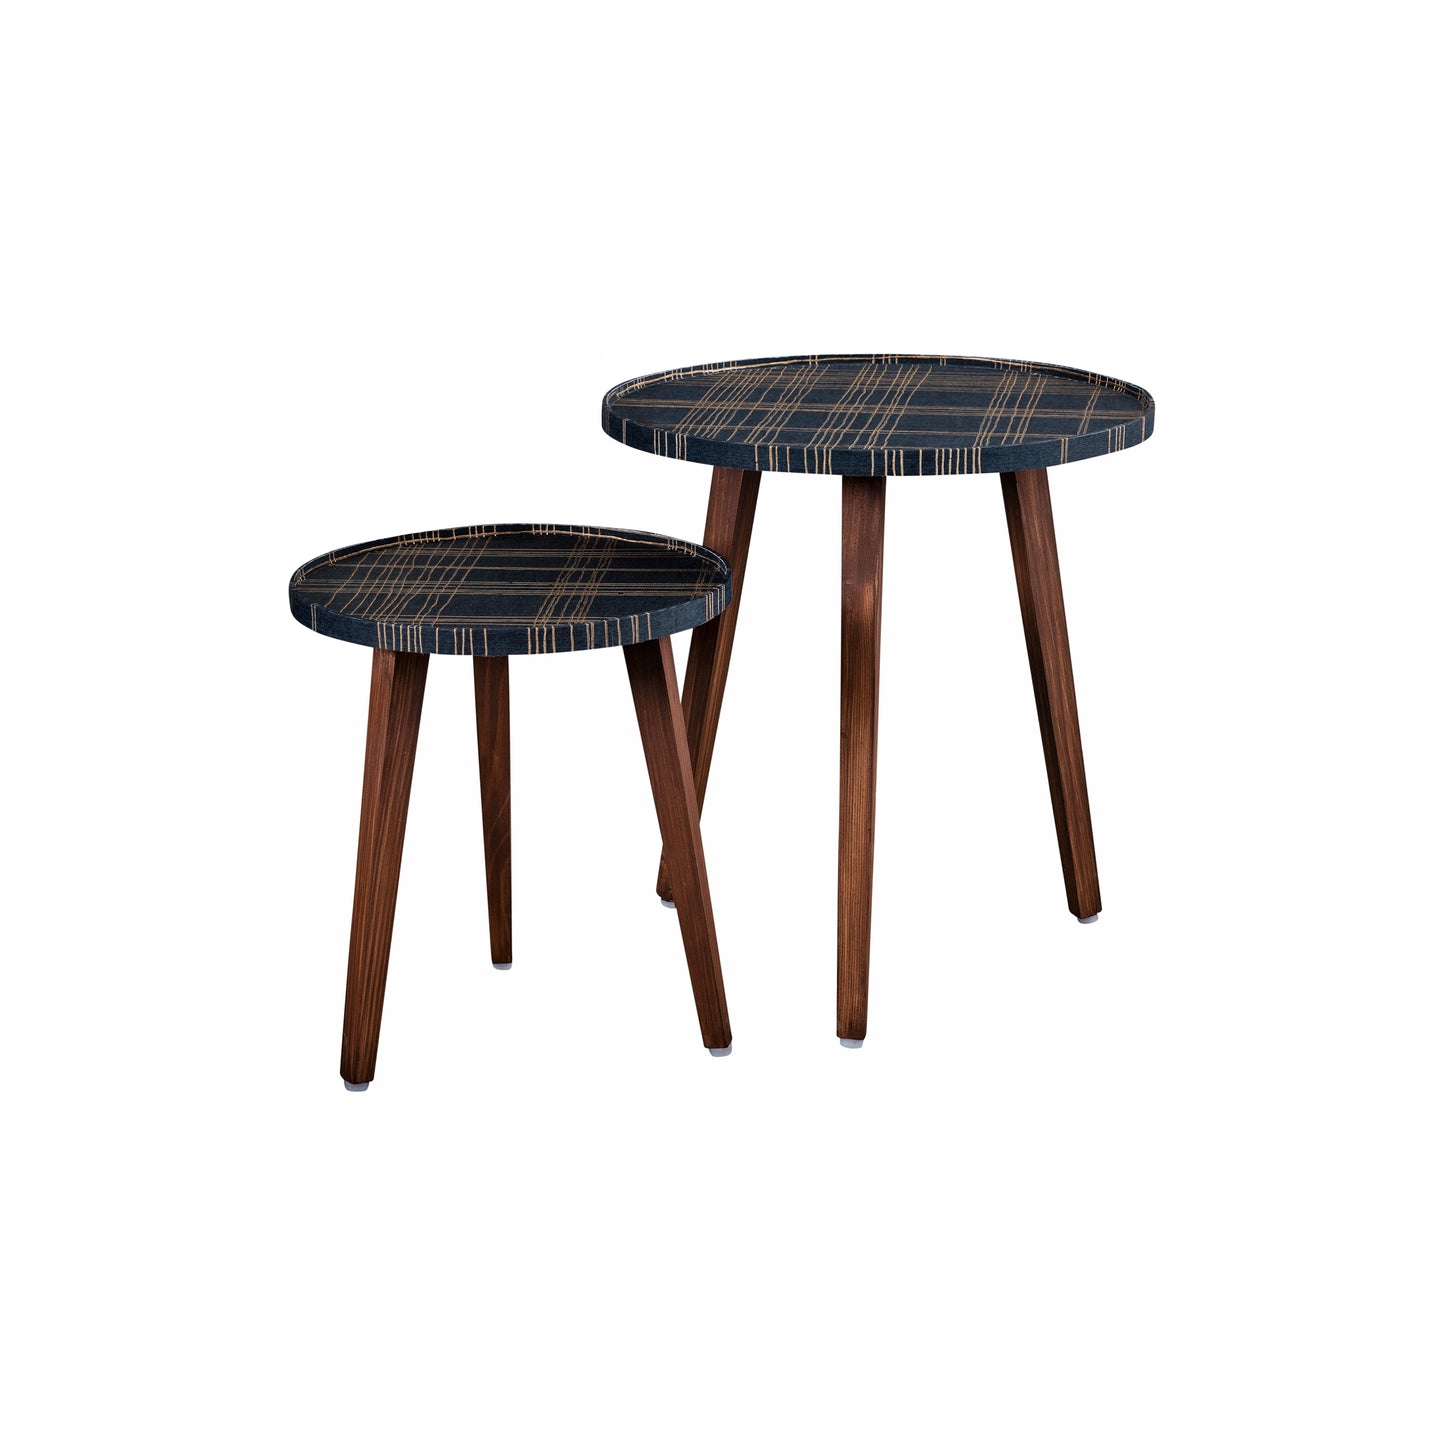 A Tiny Mistake Tesseract Wooden Nesting Tables (Set of 2), Living Room Decor